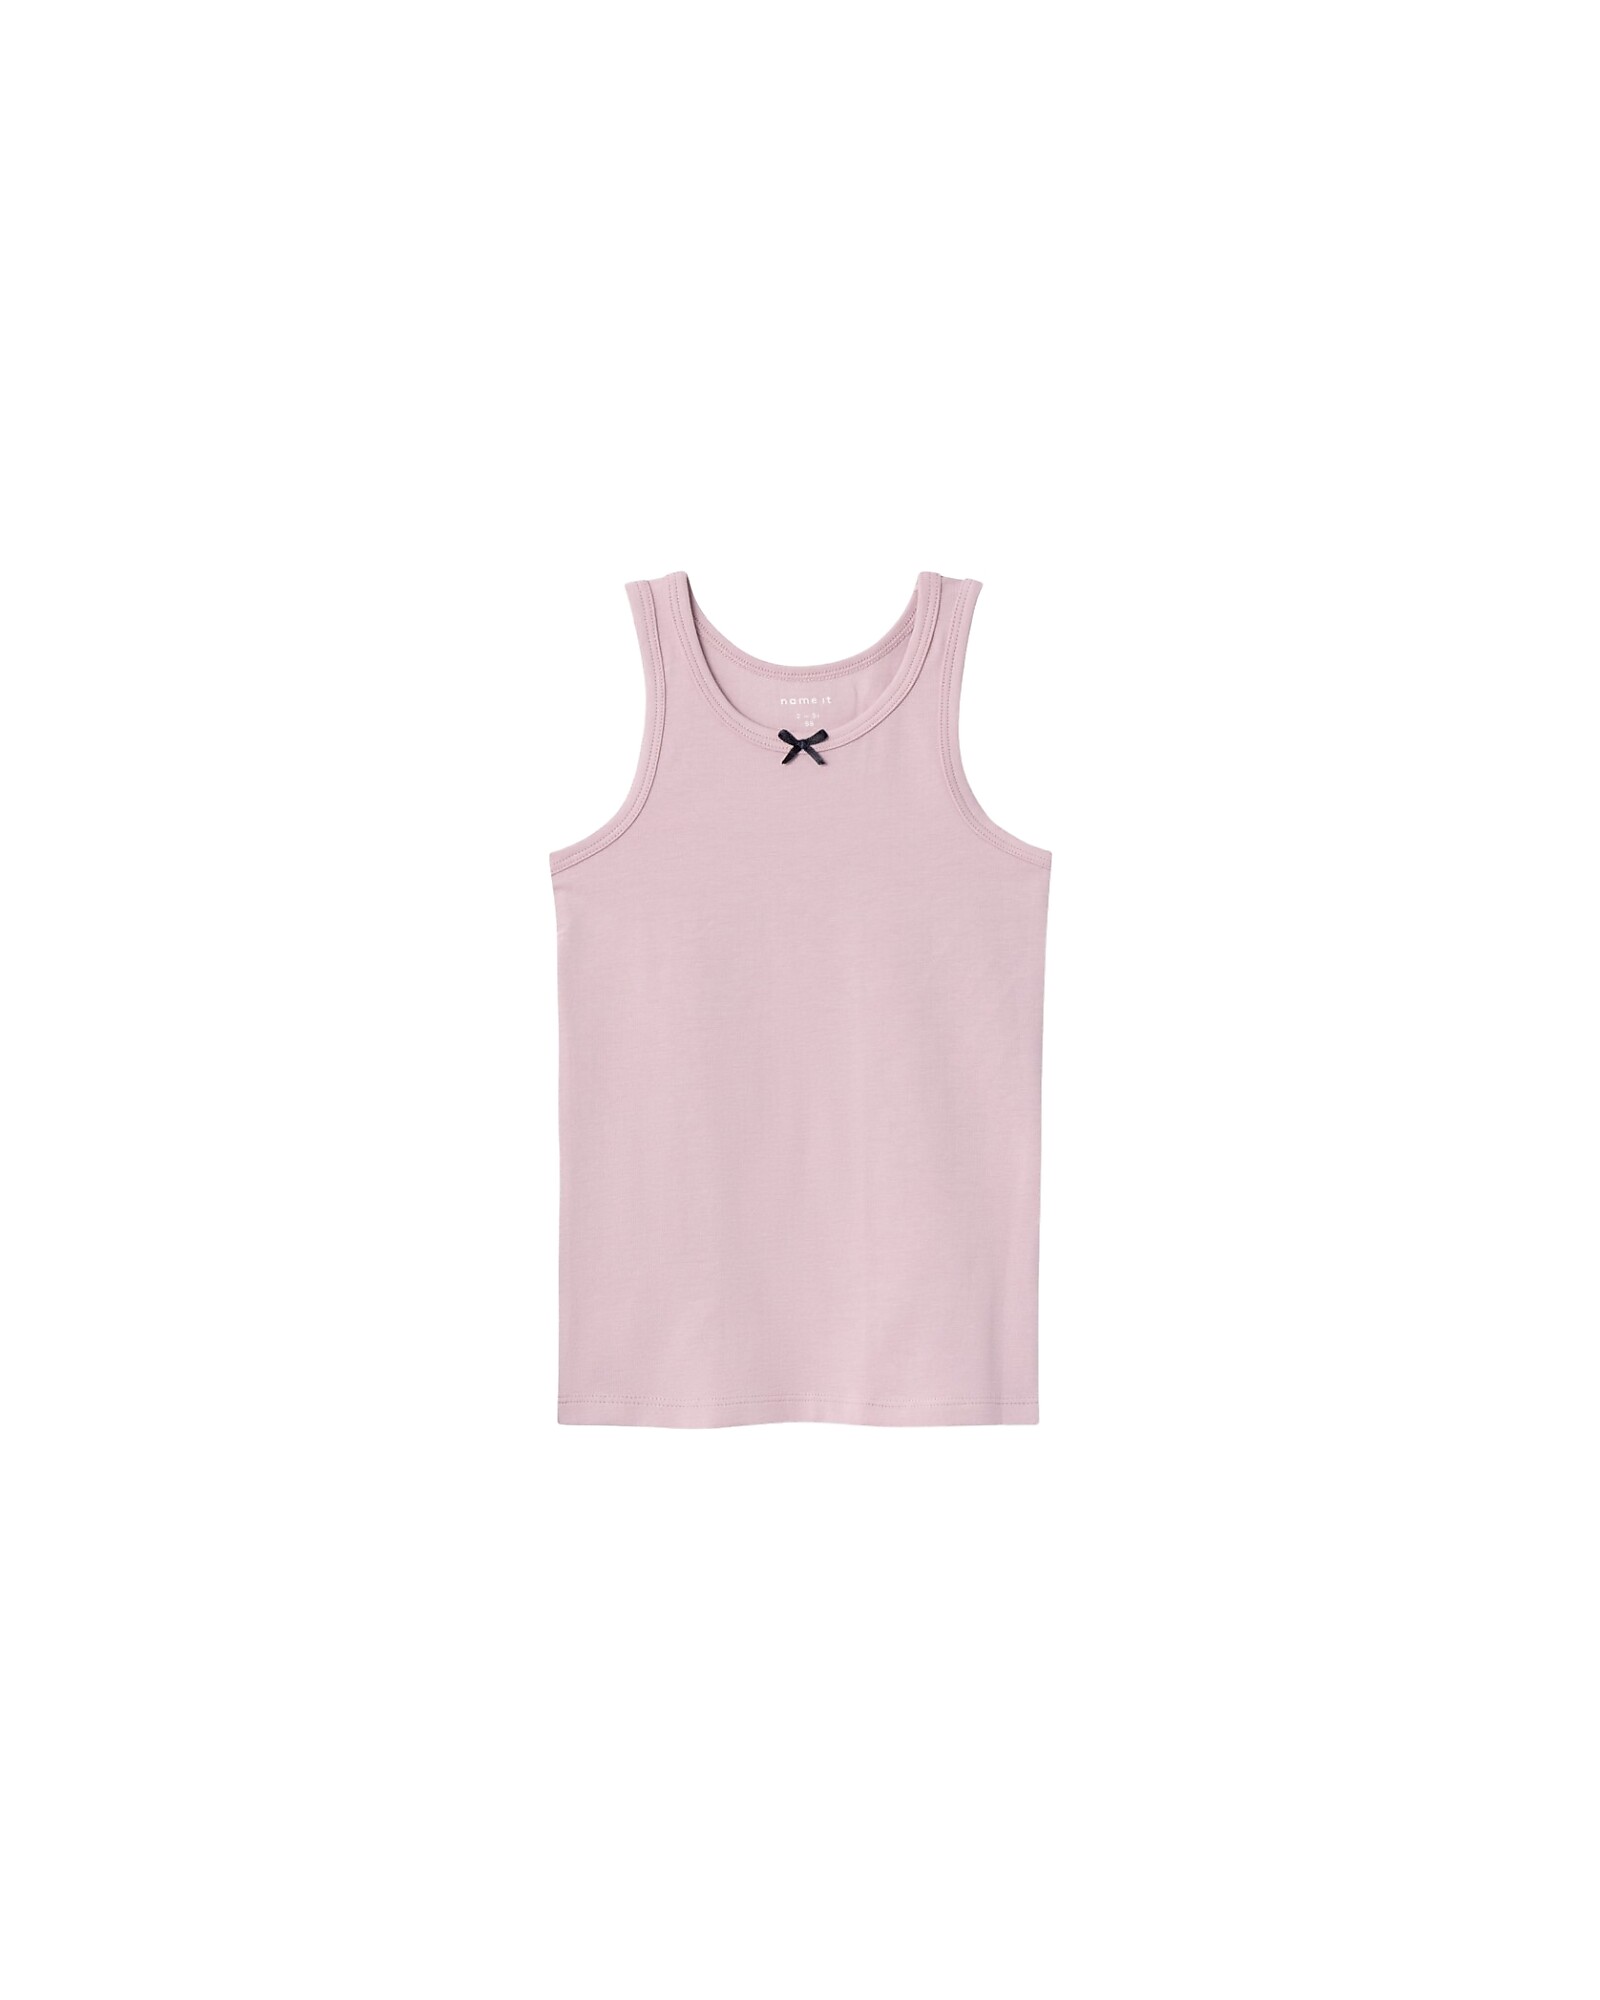 2-pack Lace-trimmed Tank Tops - Powder pink/white - Kids